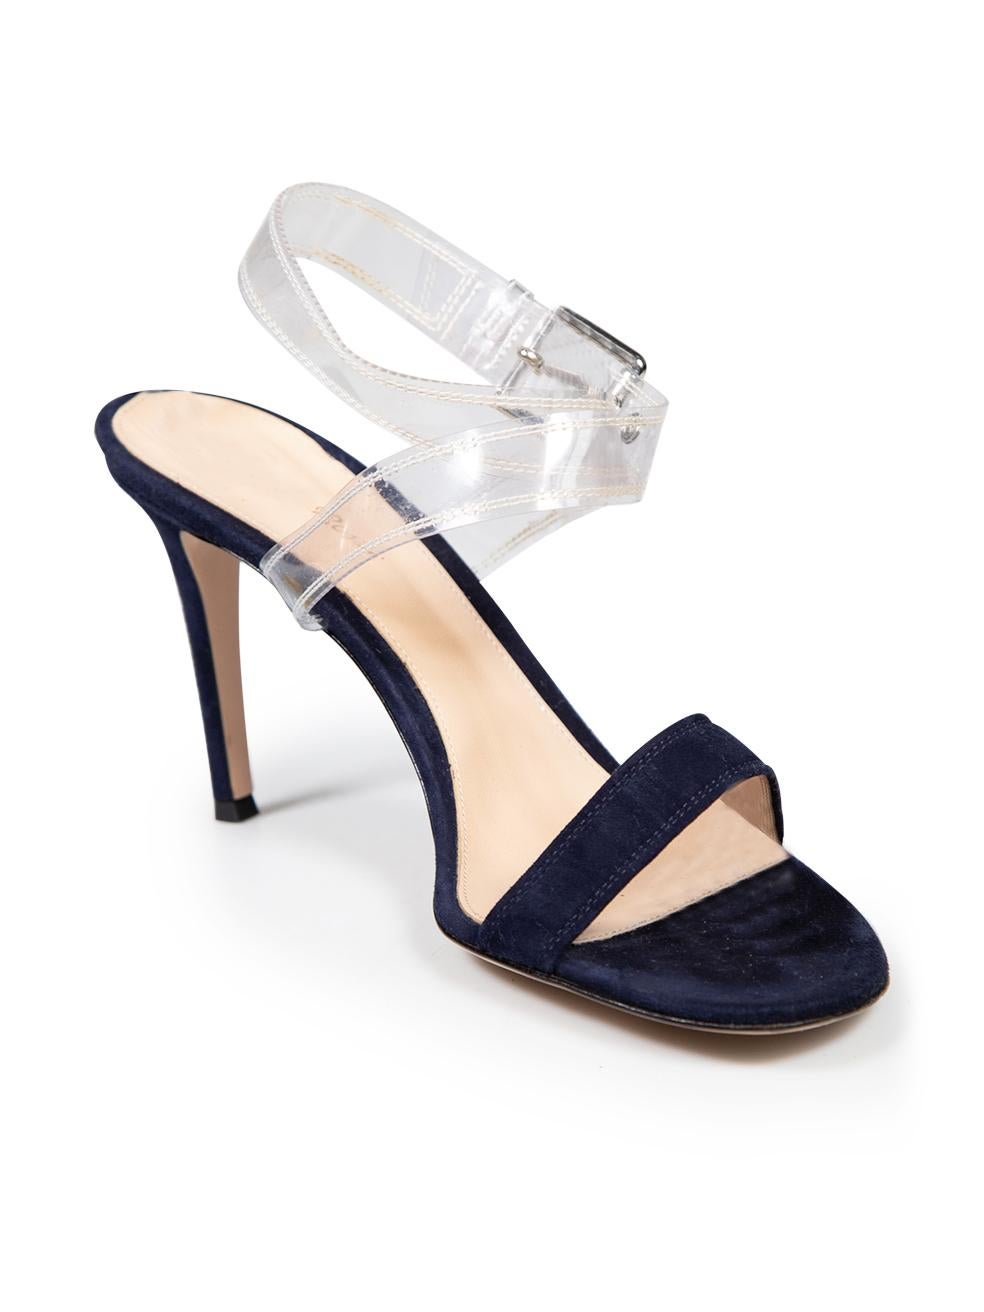 CONDITION is Very good. Minimal wear to sandals is evident. Minimal discolouration to stitching on PVC strap on this used Gianvito Rossi designer resale item.
 
 
 
 Details
 
 
 Navy
 
 Suede
 
 Sandals
 
 PVC Straps
 
 High heeled
 
 Open toe
 
